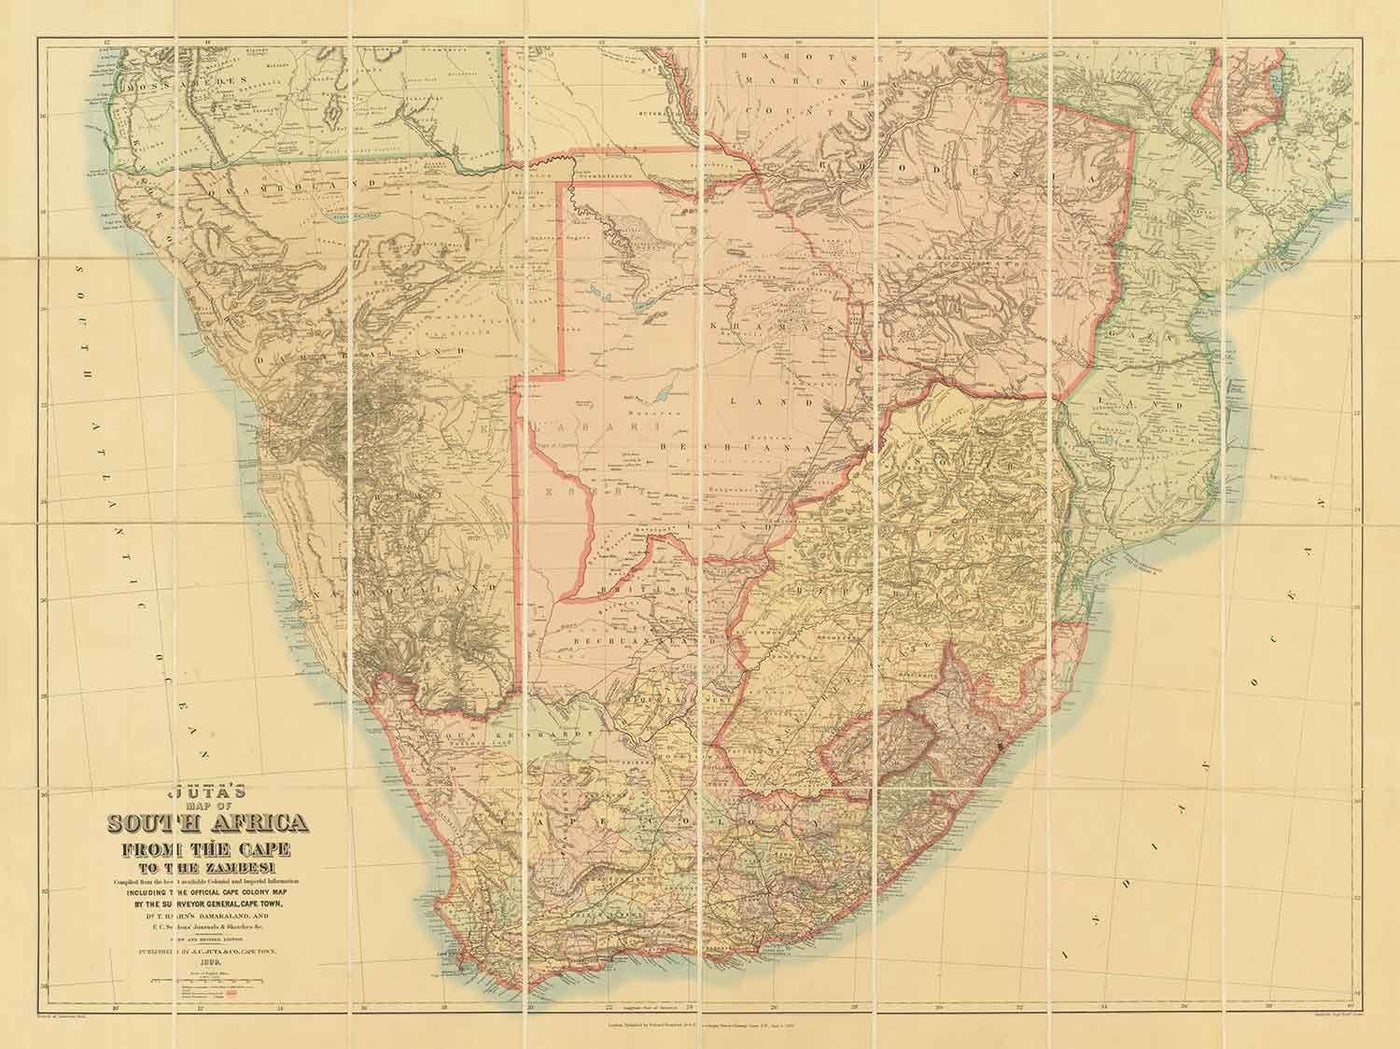 Old Map of South Africa & Central Africa 1899 - British Empire Imperialism & Boer Wars, Cape Town, Mozambique, Botswana,